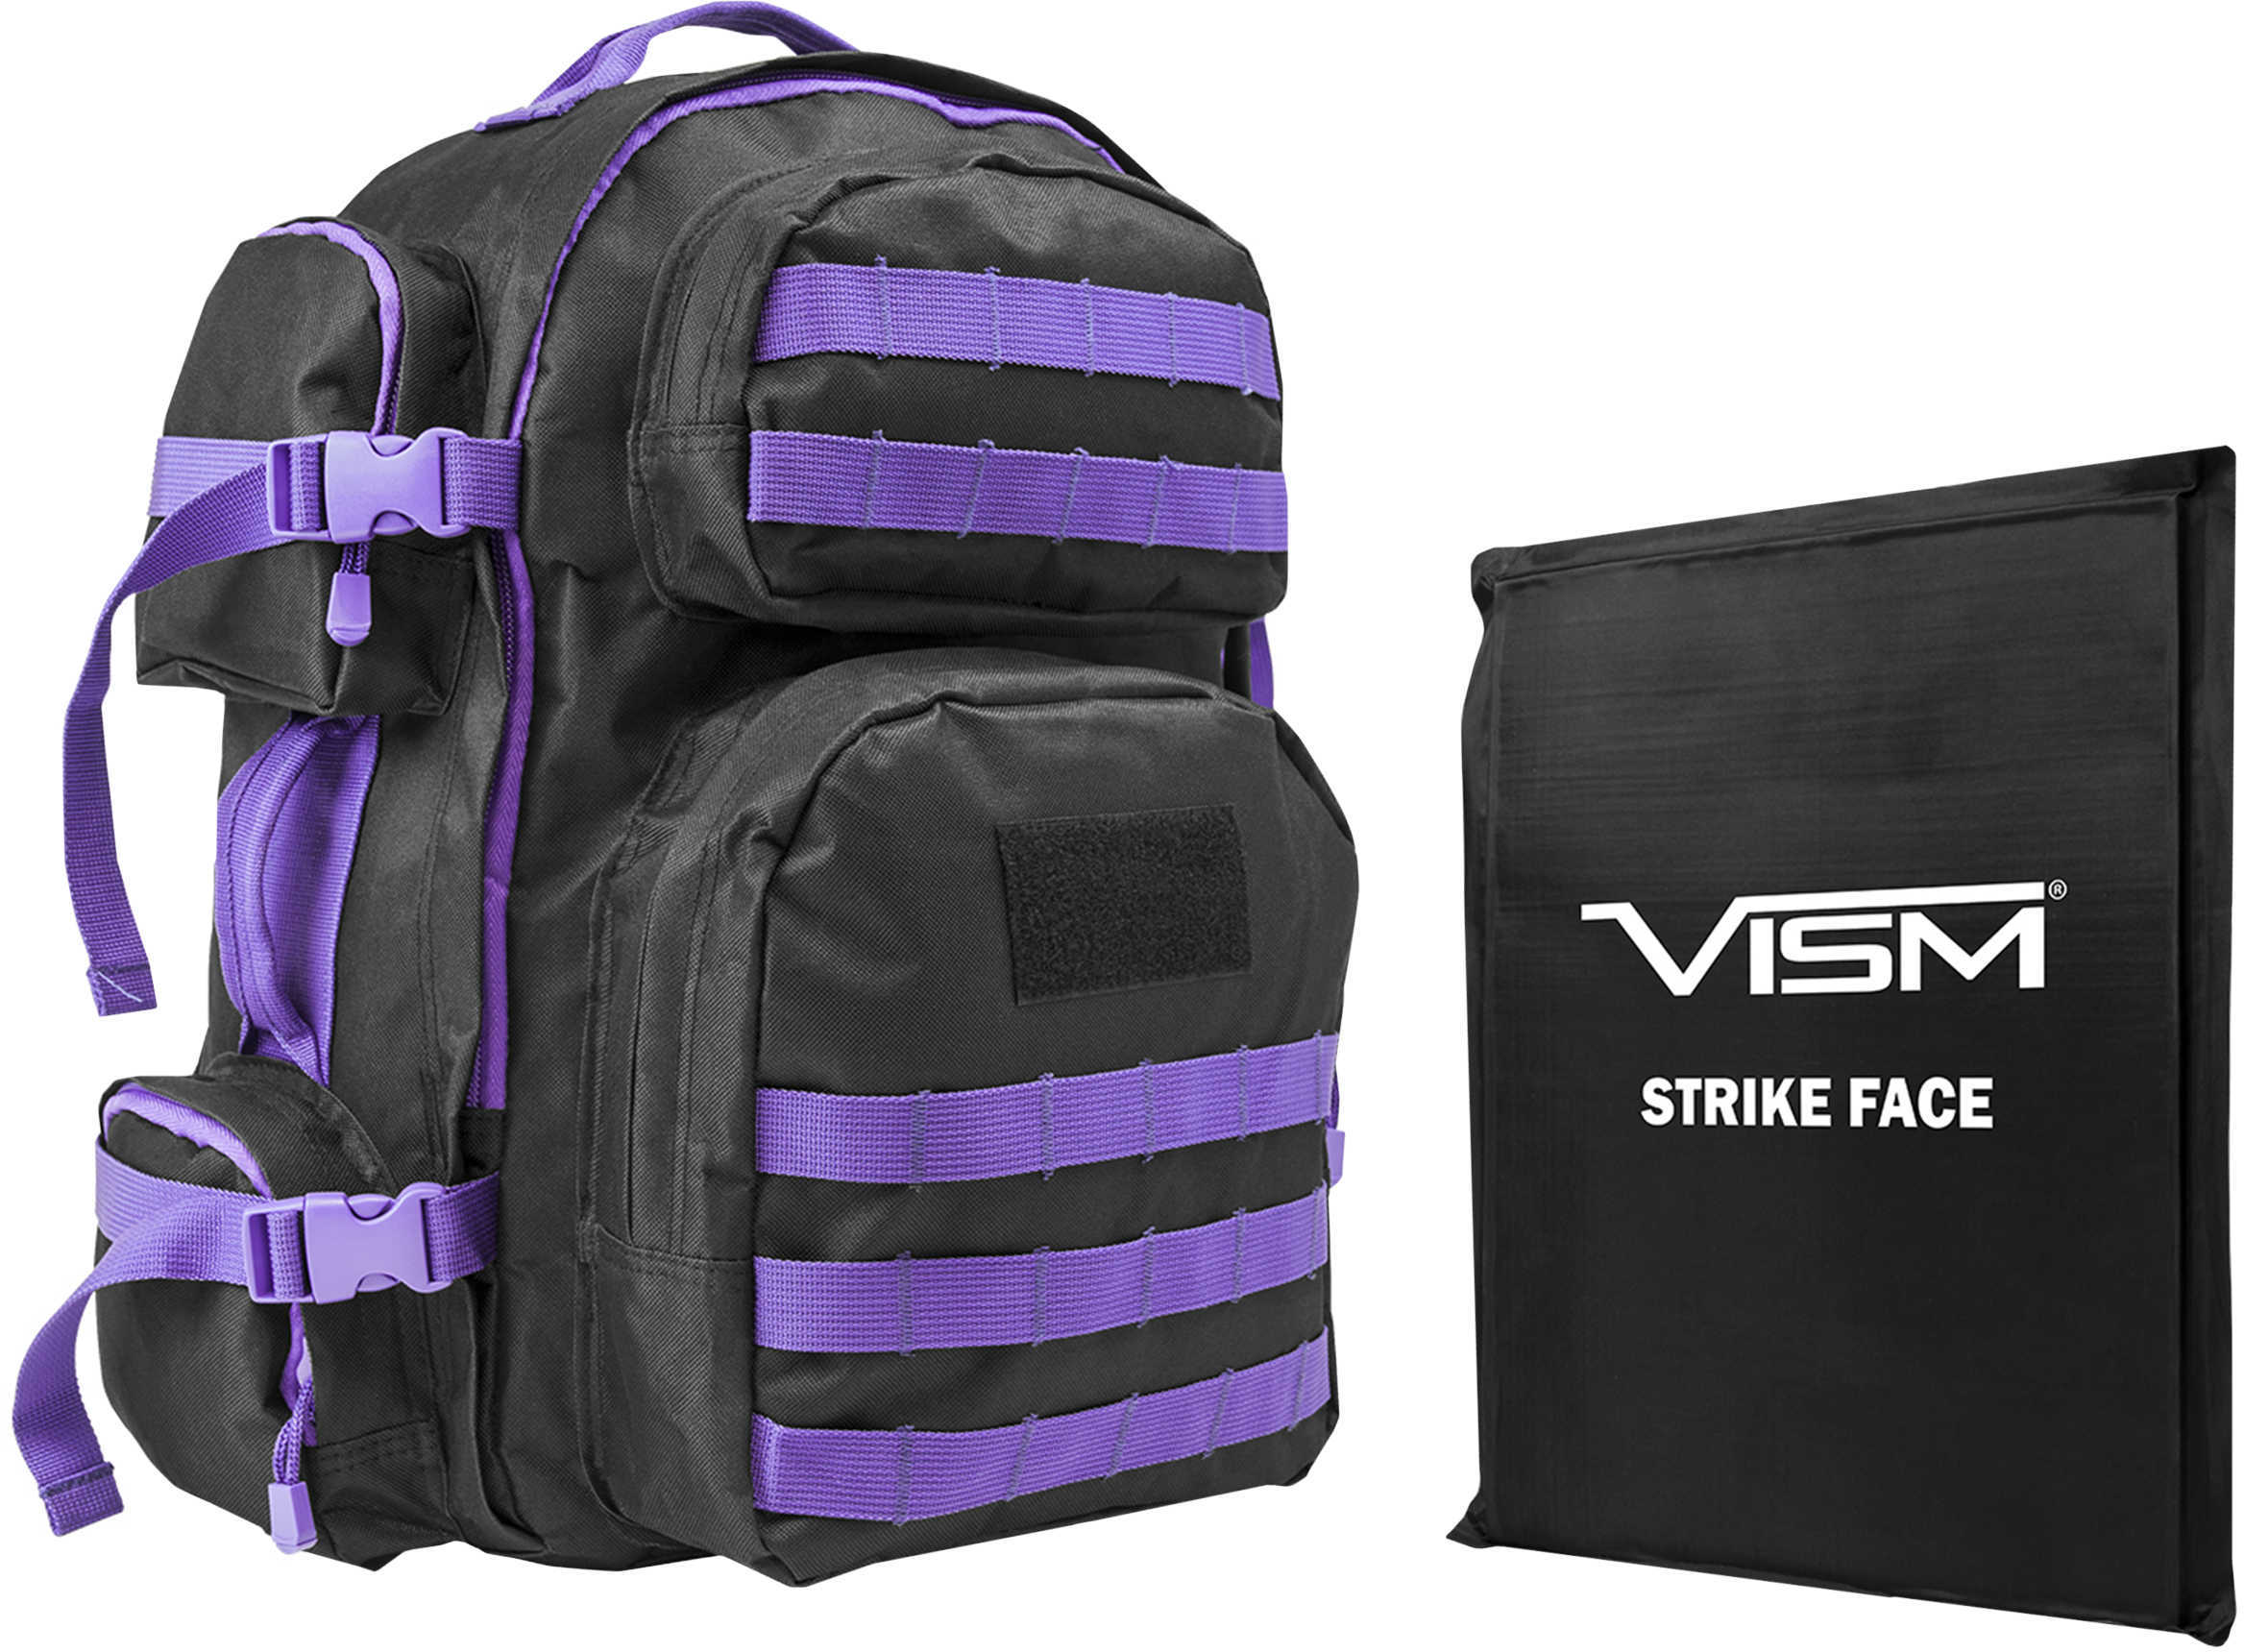 NcStar Tactical Backpack with 10"x12" Square Panels Black & Purple Md: BSCBPR2911-A